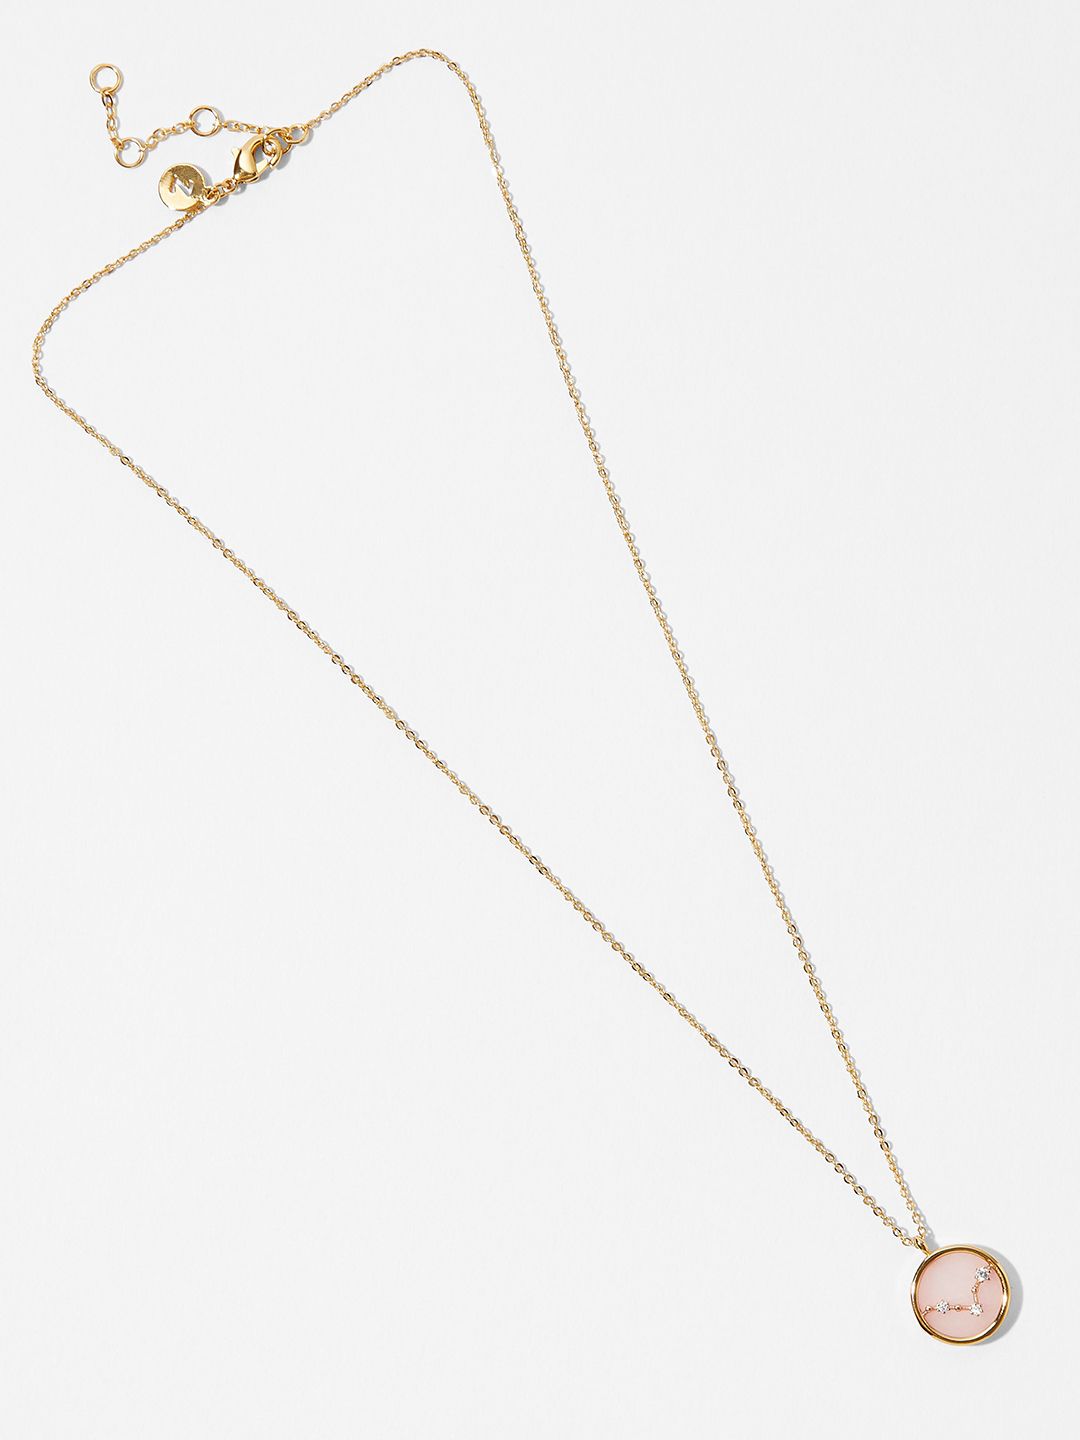 Accessorize Women Gold-Toned & Pink Necklace Price in India